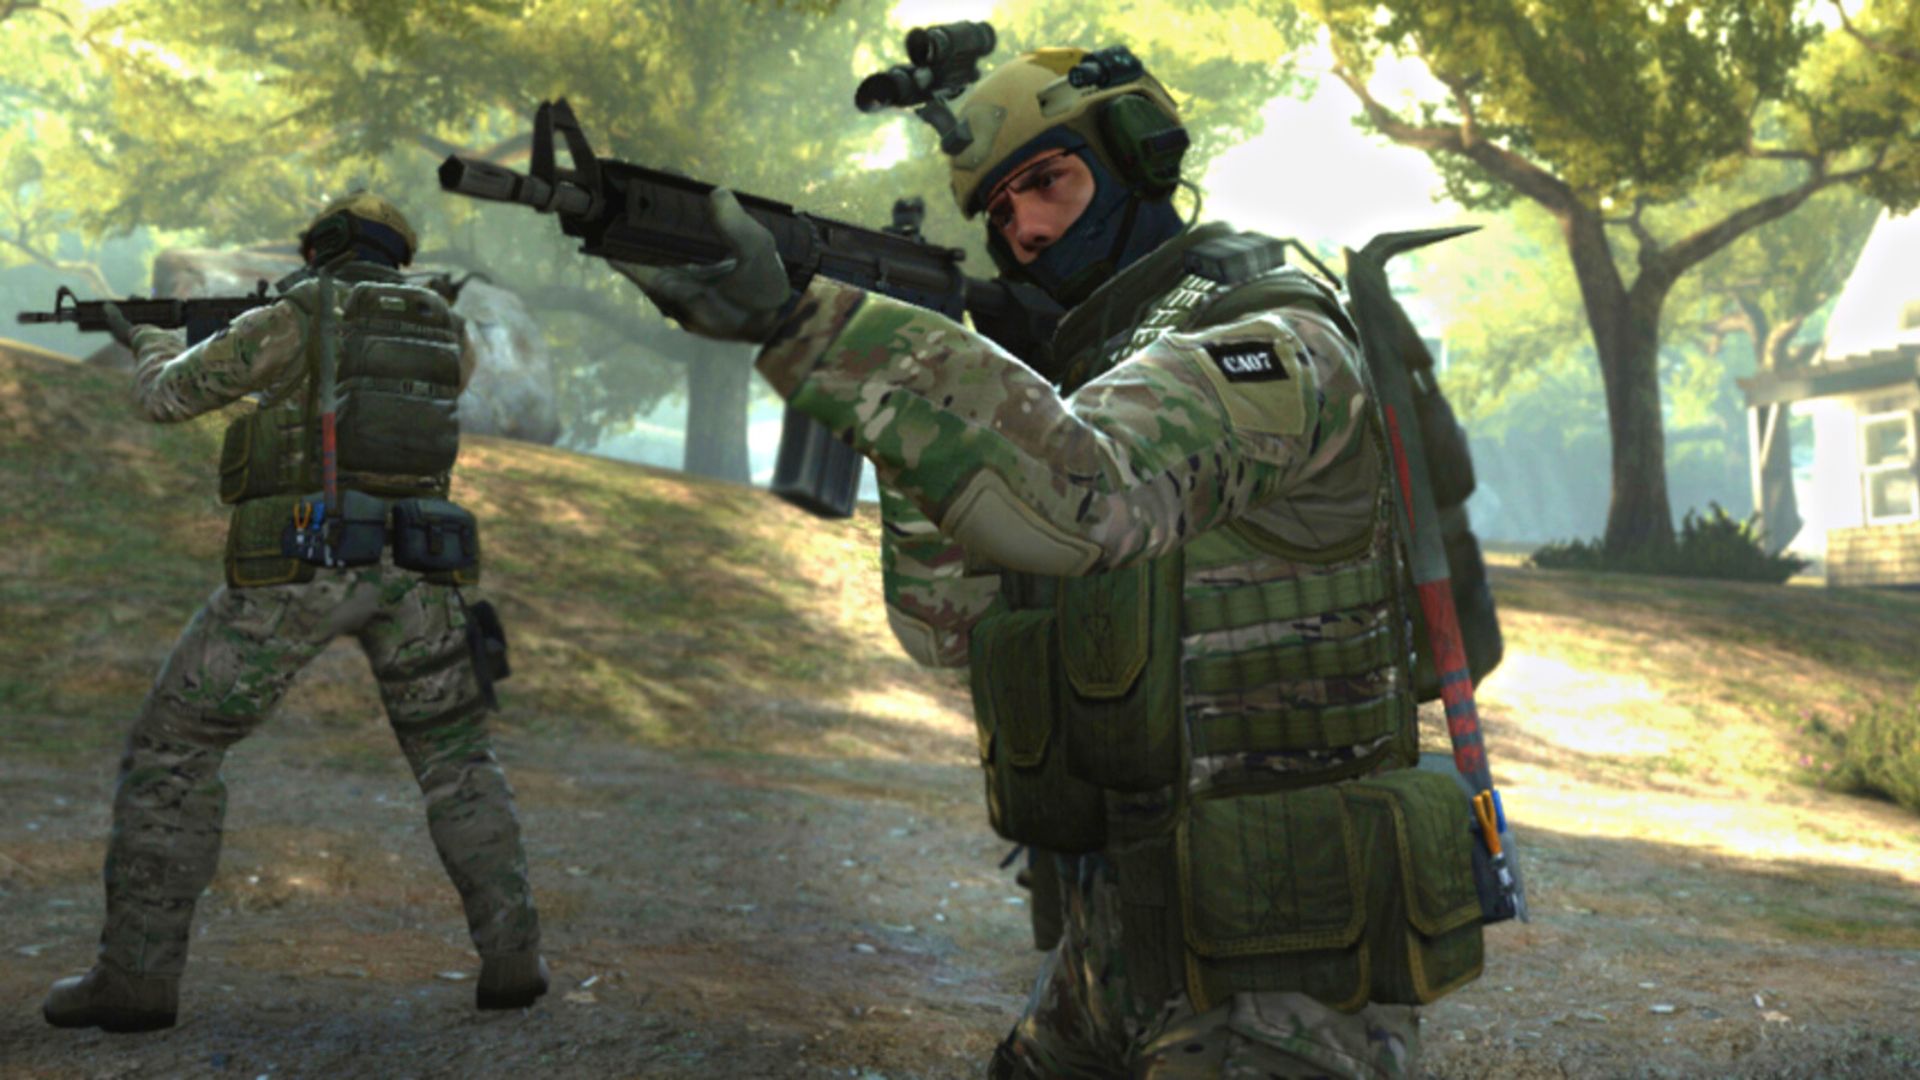 Report: Valve's 'Counter-Strike 2' Is Actually Happening, And Almost Here